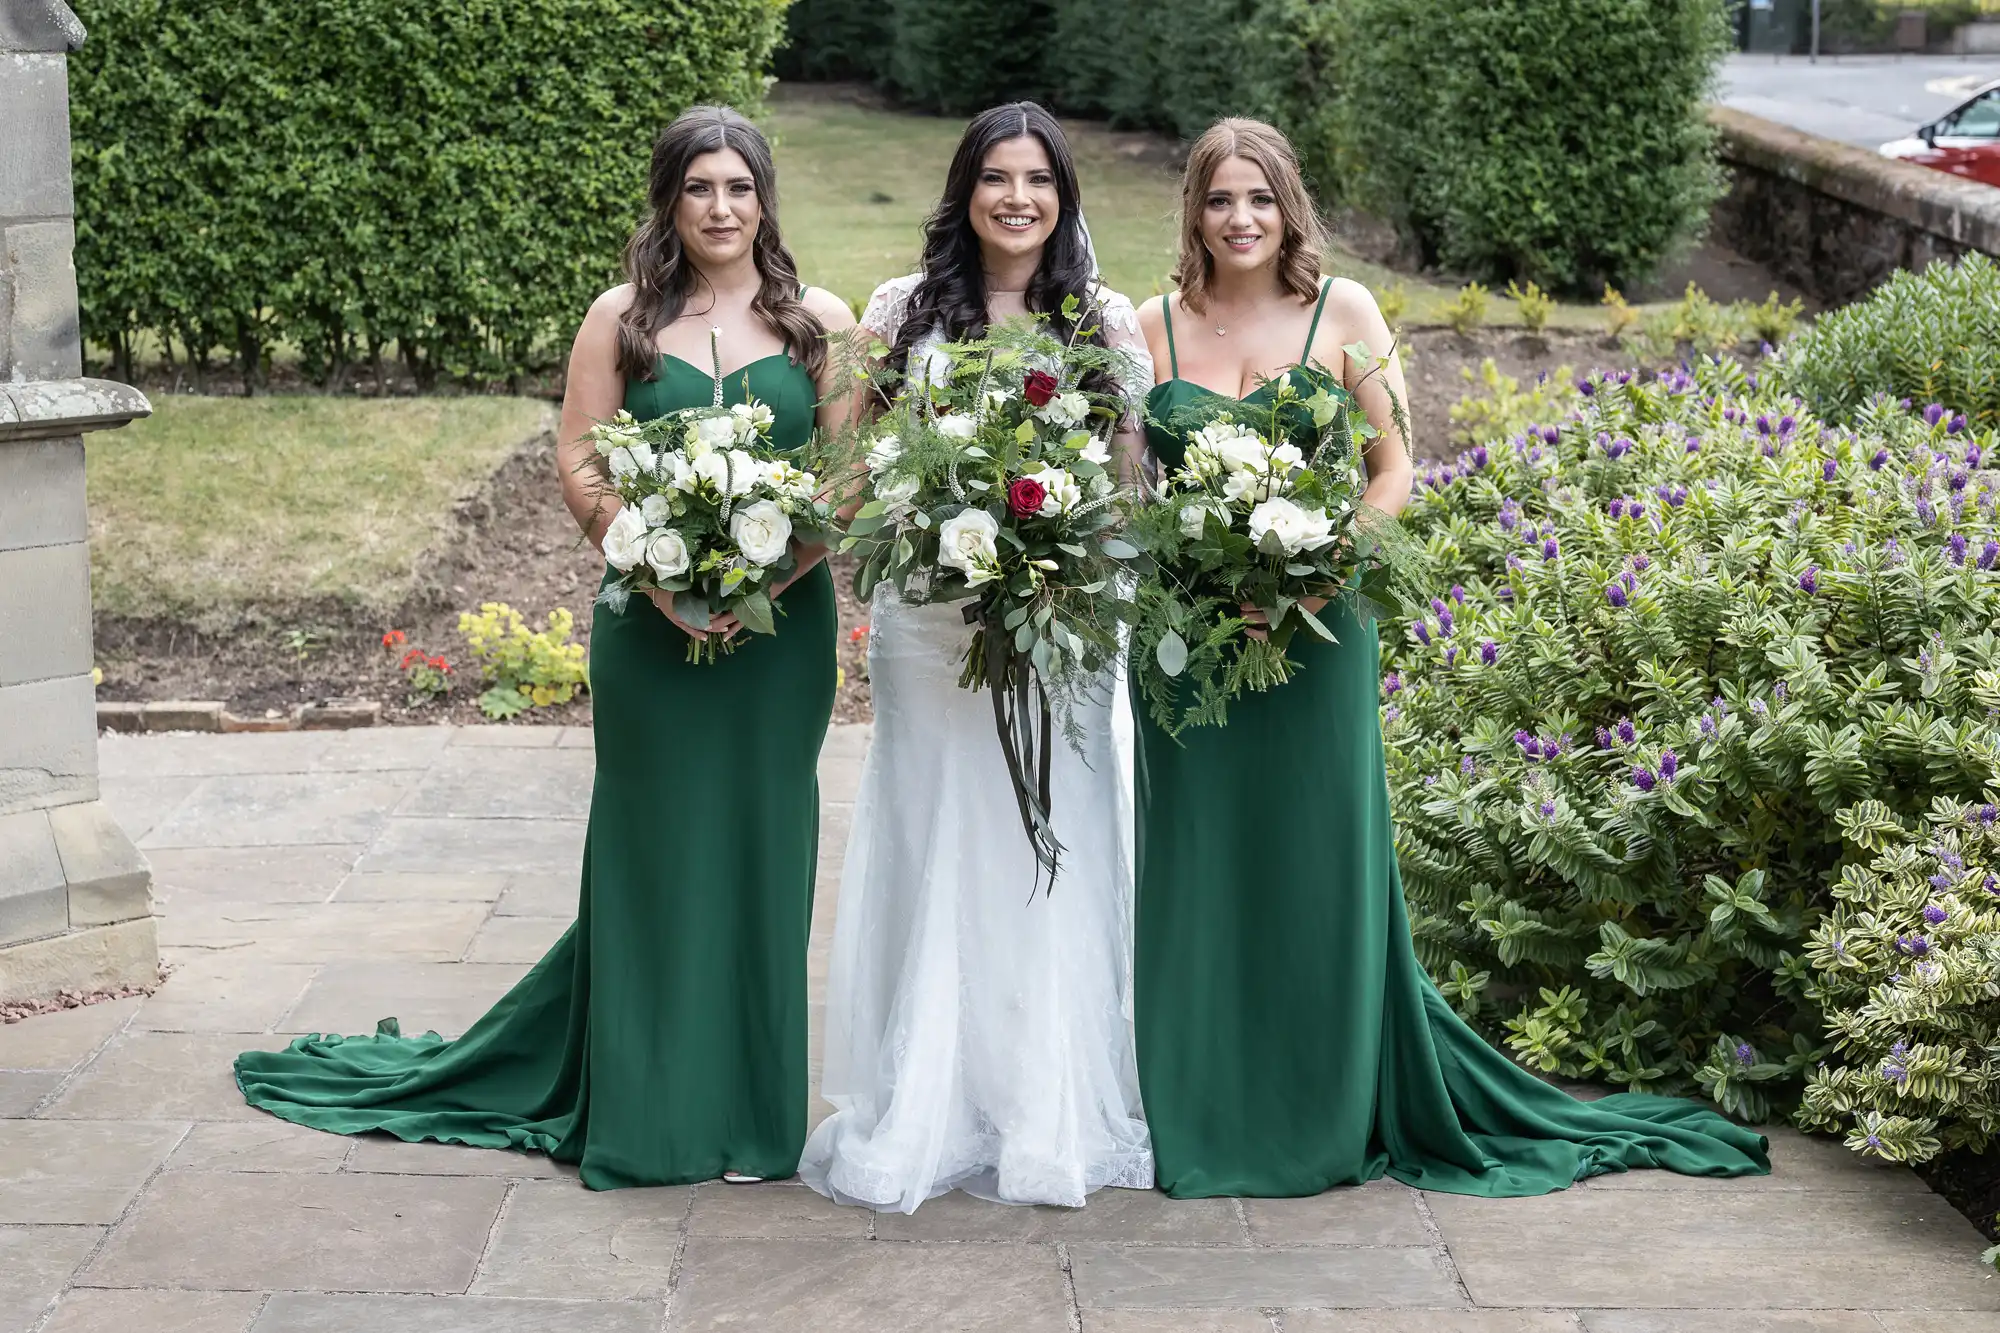 Three women in formal attire holding bouquets, two in green dresses and one in a white wedding dress, standing outdoors.